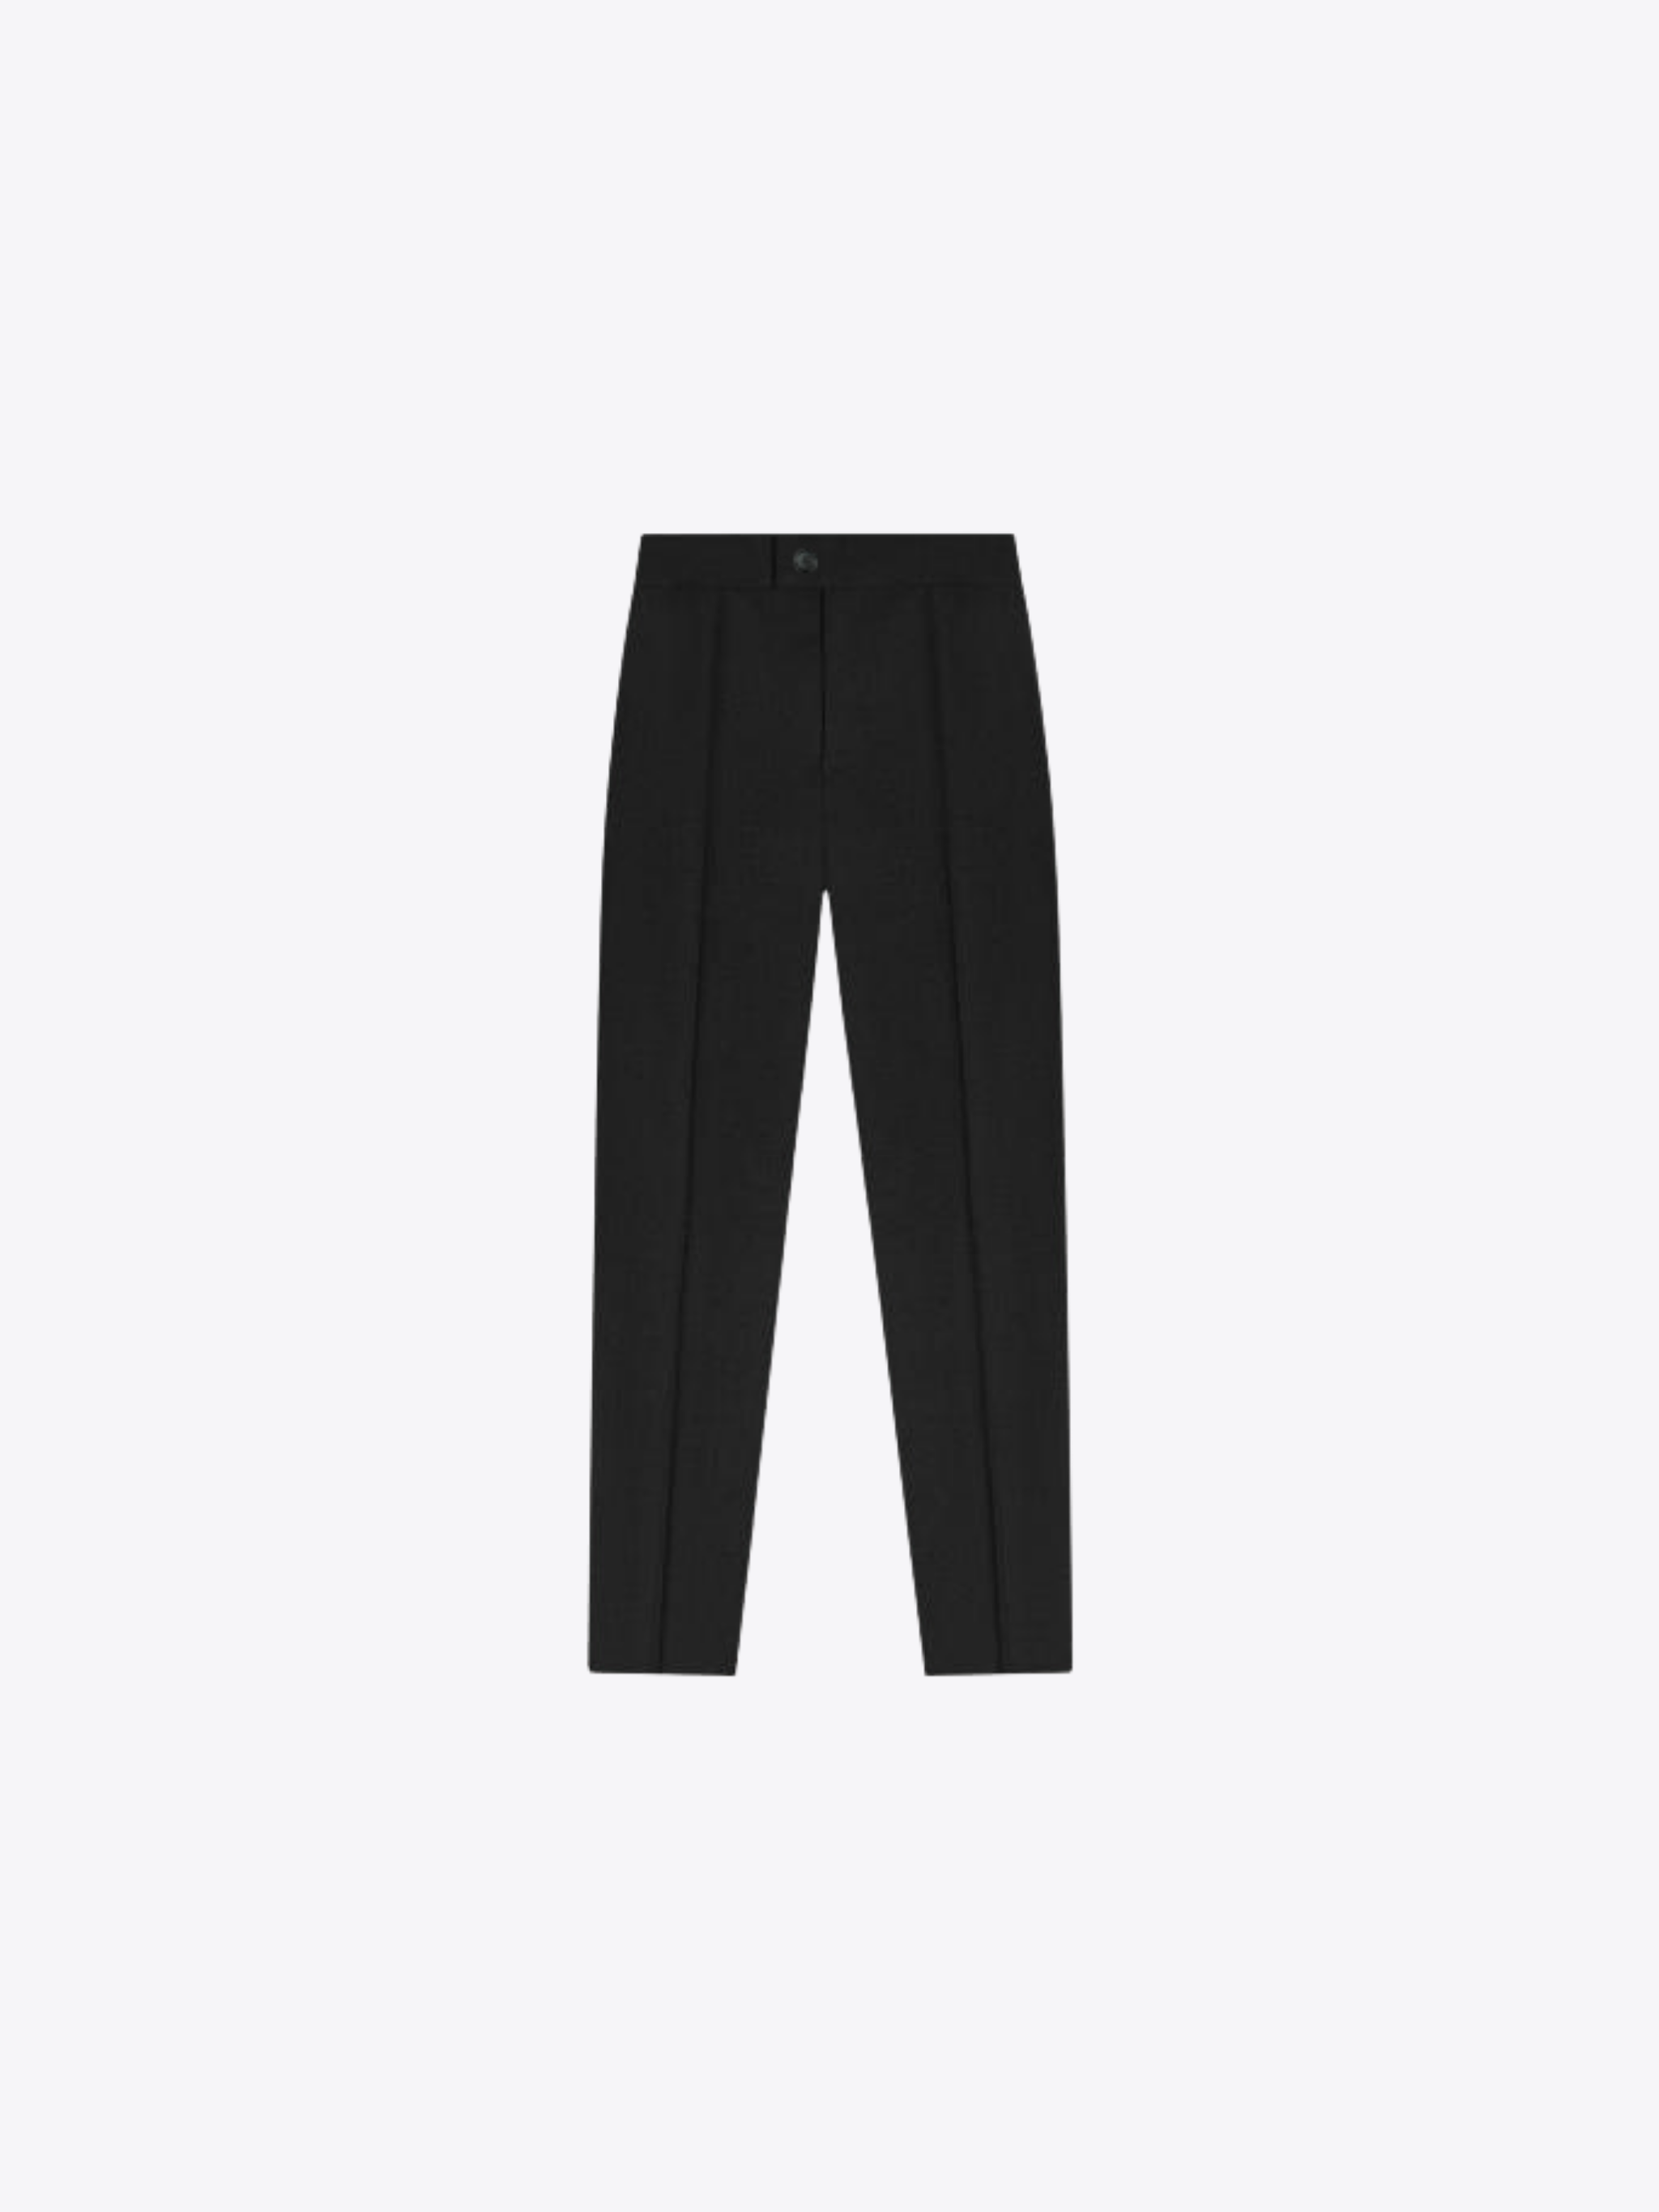 Robell | Tailored Straight Short Trousers | 51408 | Bentleys Banchory